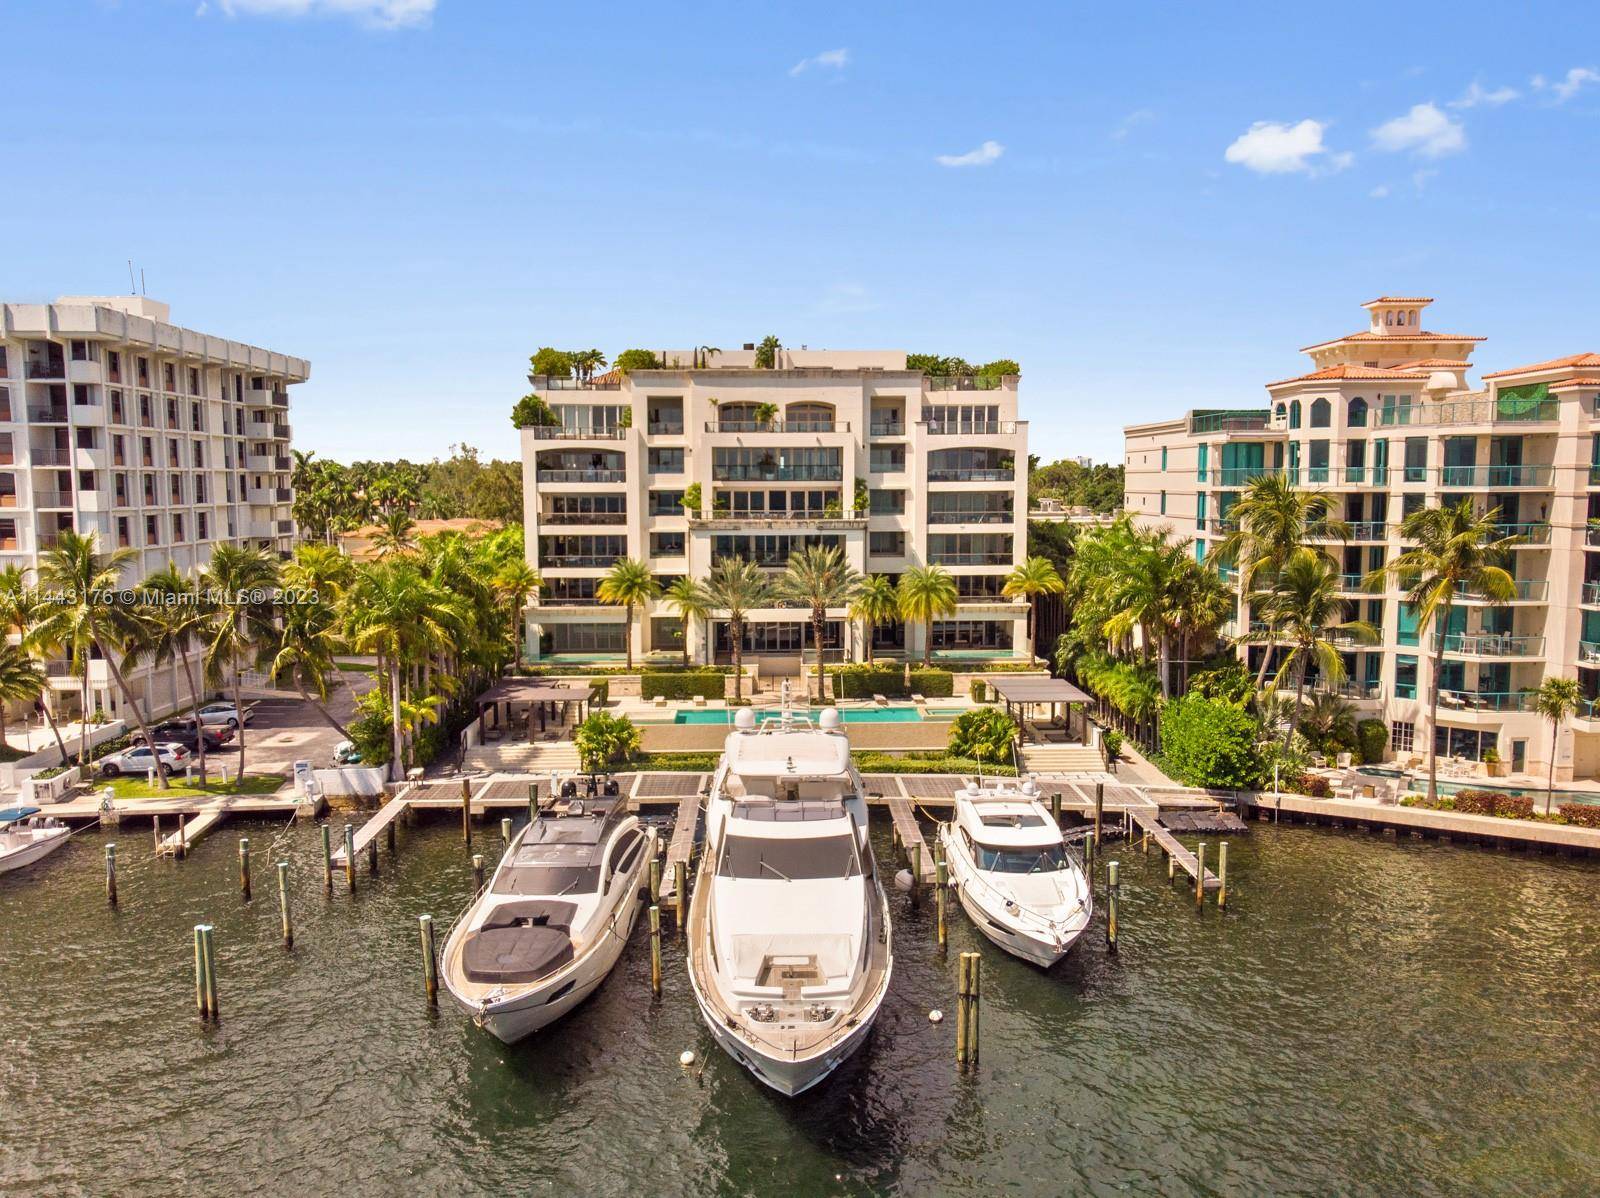 Private boutique building, unique unit w spectacular water views of Biscayne Bay, total 18 private units in heart of Coconut Grove known as Residences at Vizcaya.